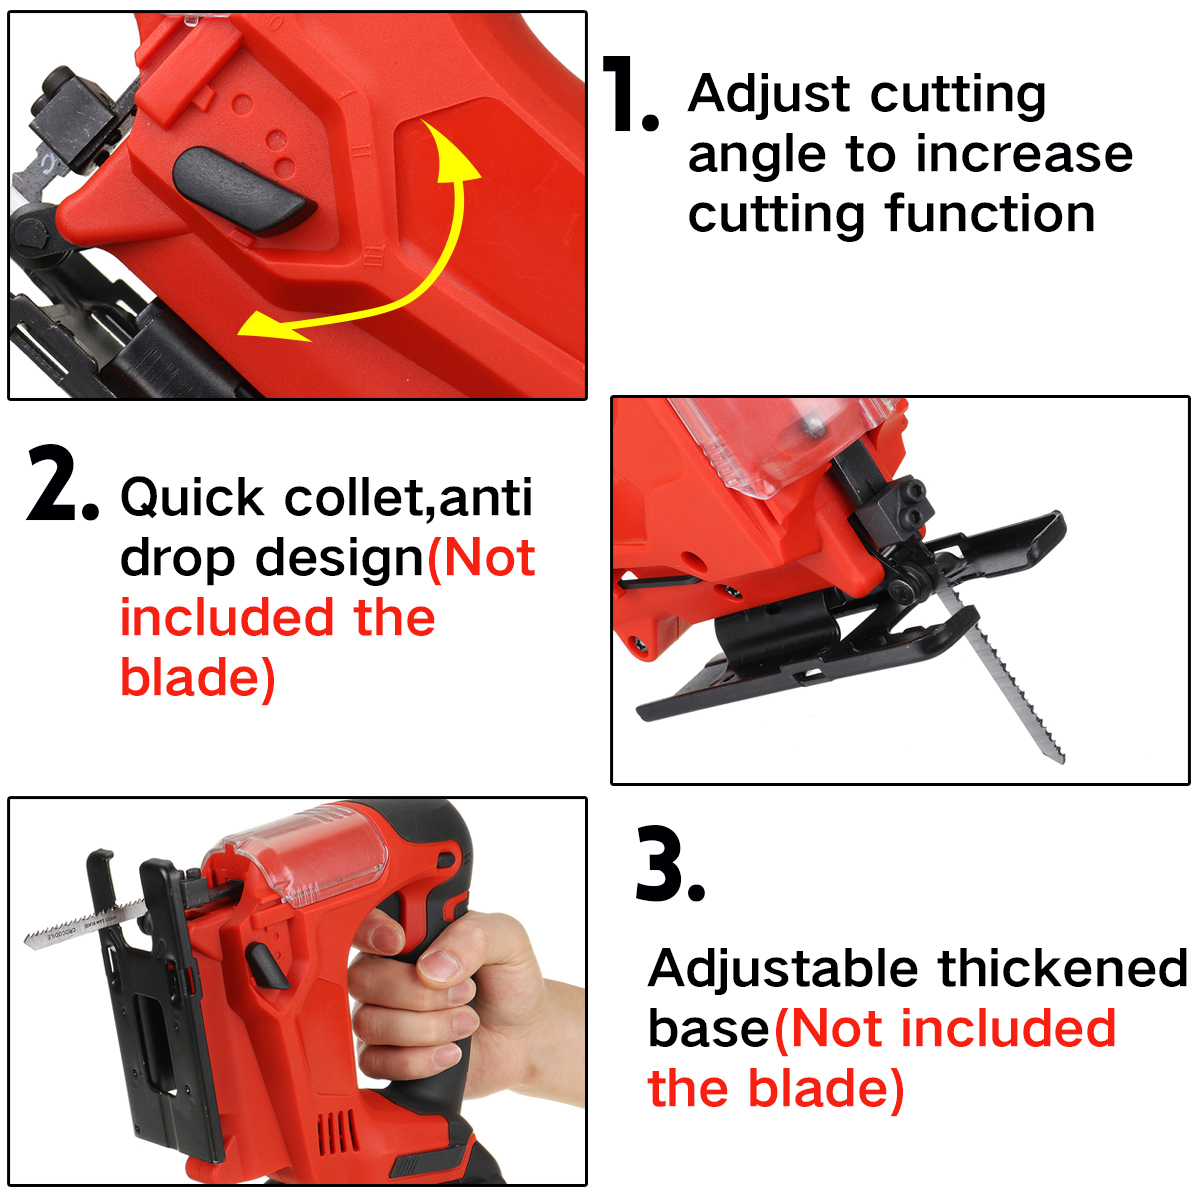 Drillpro-2000mAh-Electric-Saws-Cordless-Jig-Saw-Angle-Adjustble-65mm-Cutting-Depth-With-1-Or-2-Batte-1840189-9